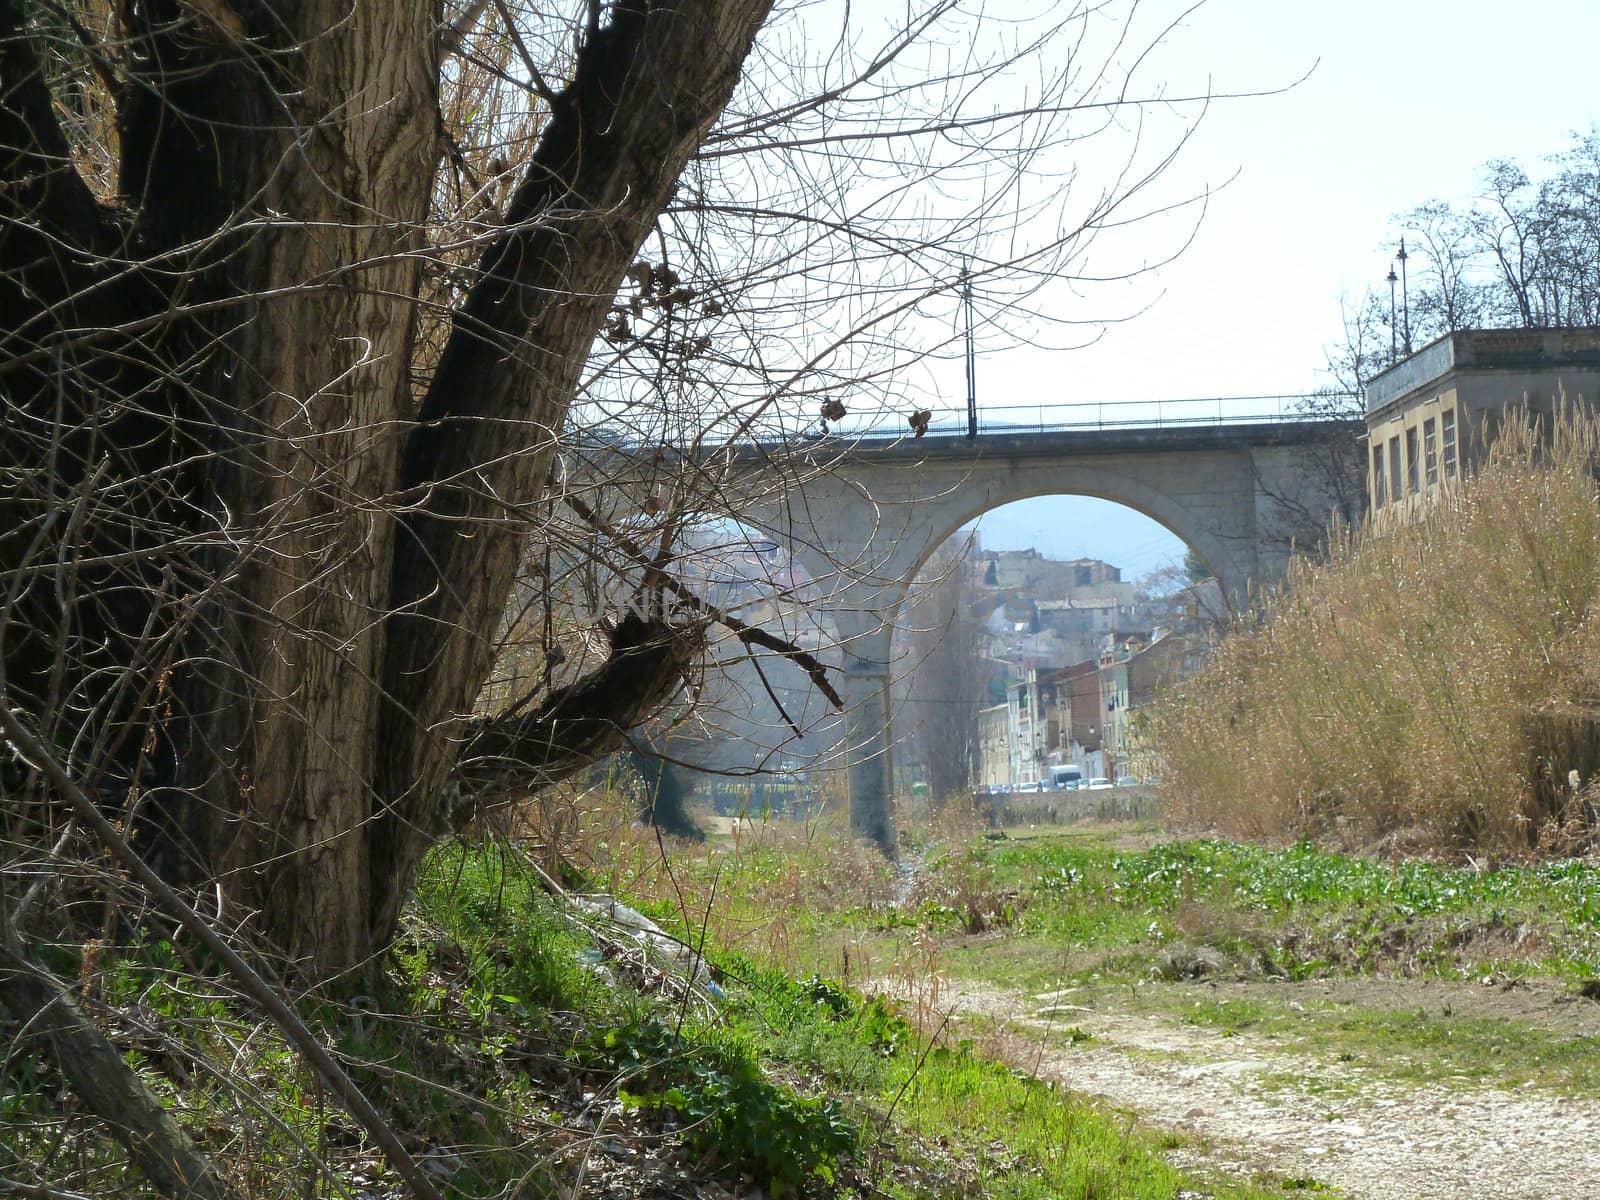 view of bridge with trees and growth